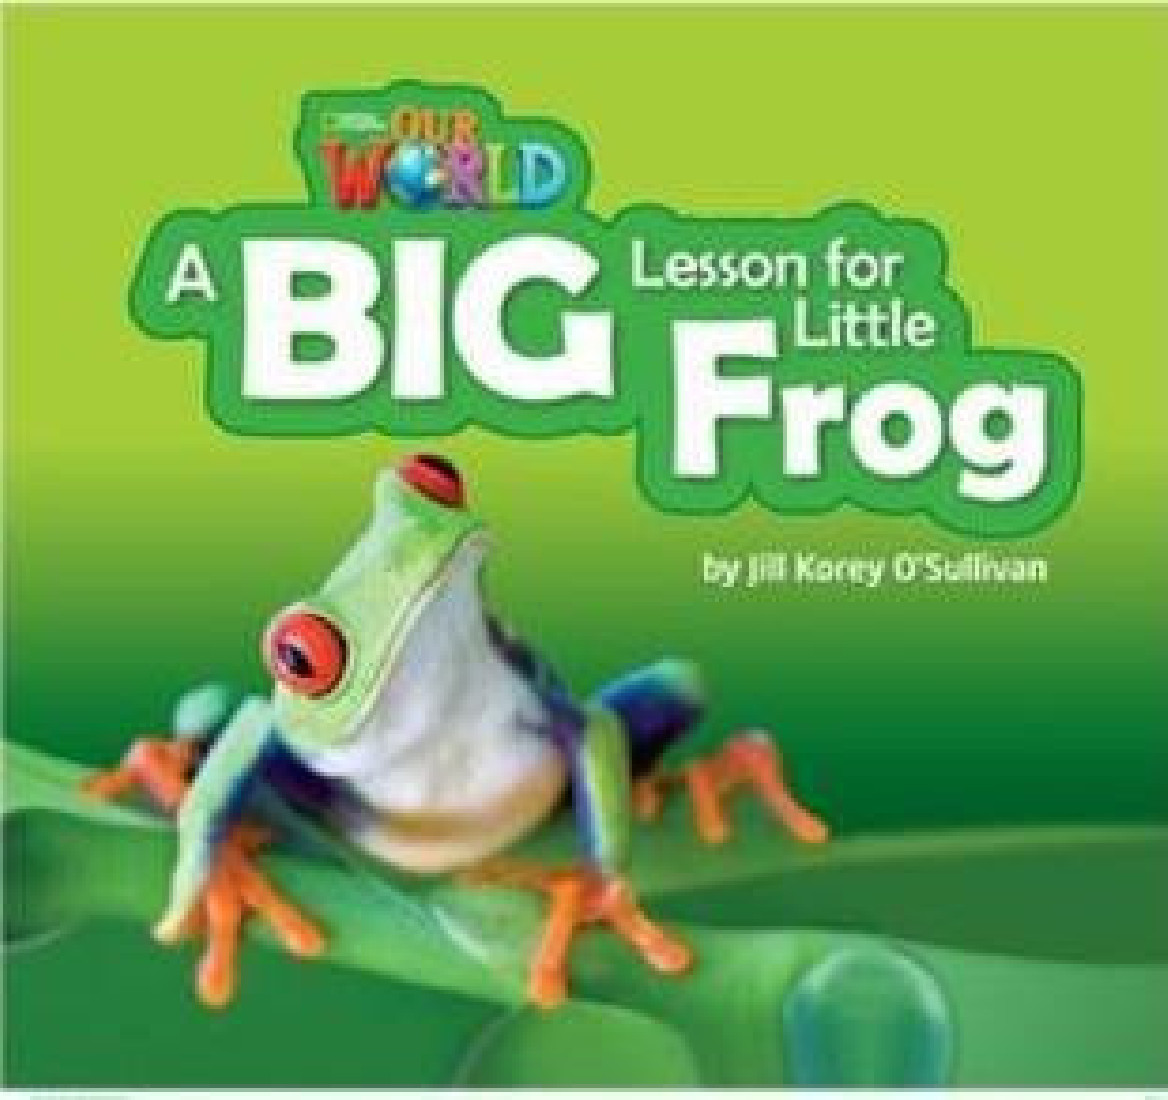 OUR WORLD 2: A BIG LESSON FOR LITTLE FROG READER- BRE